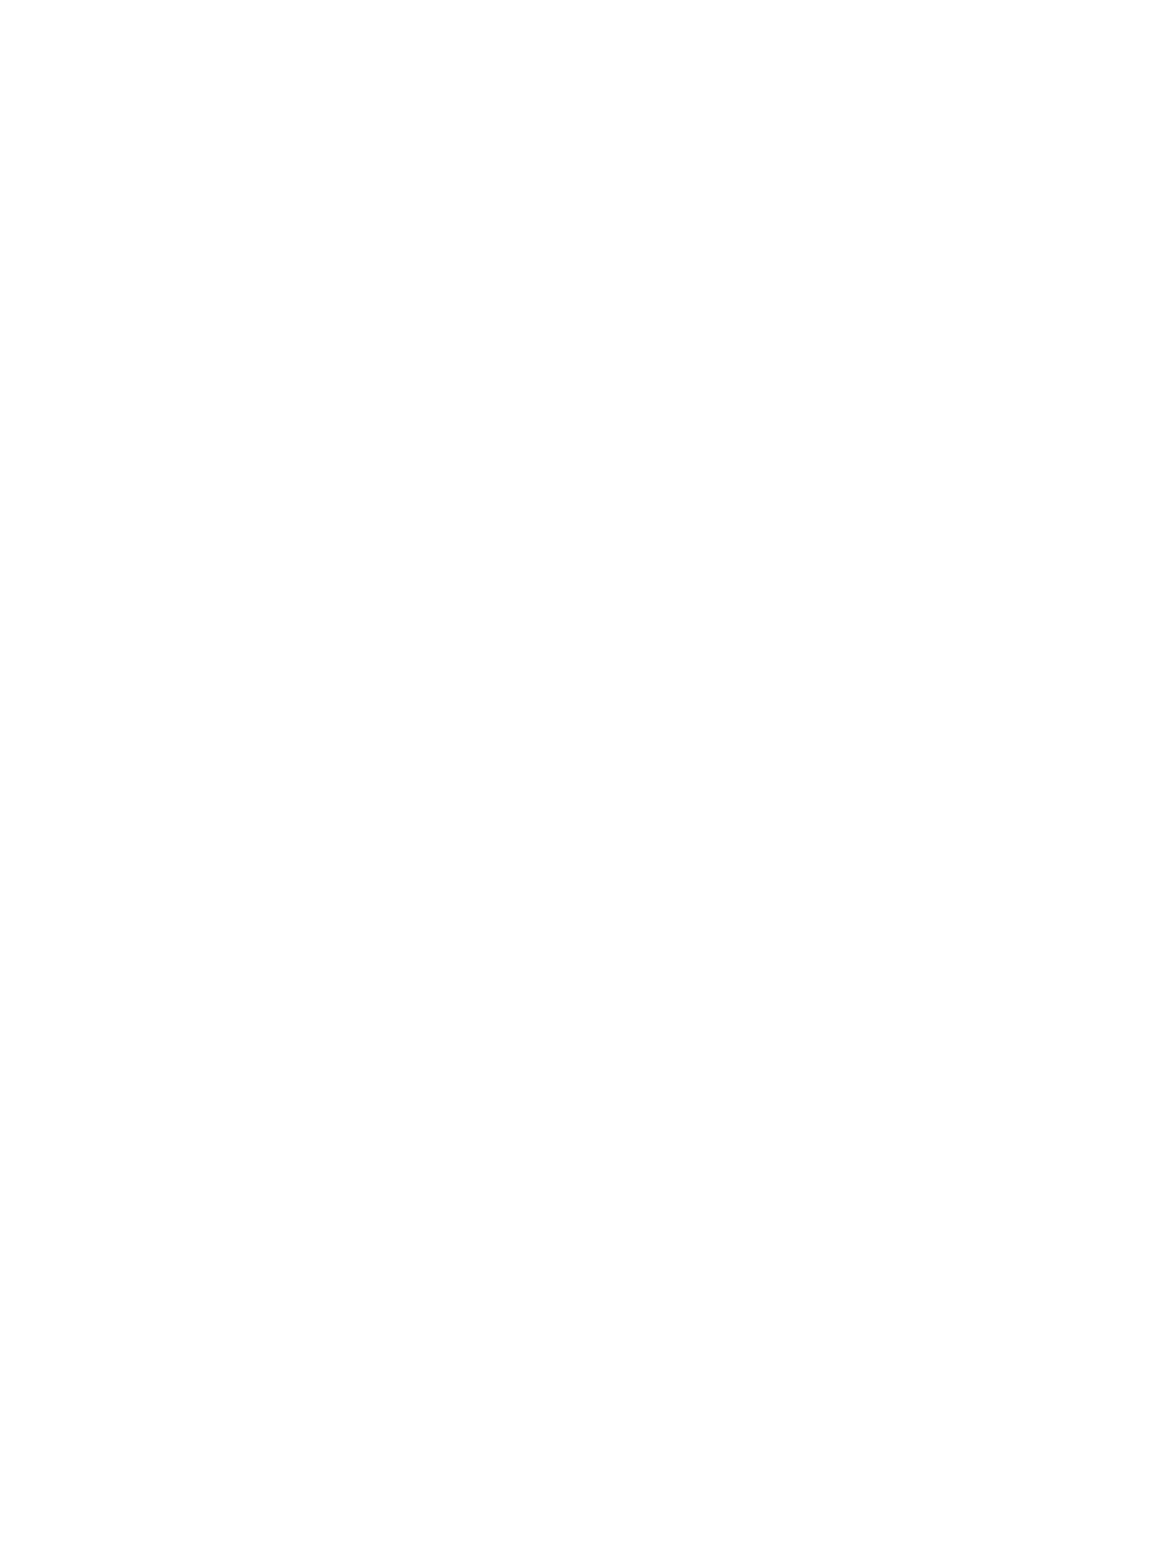 New York Times logo for dark backgrounds (transparent PNG)